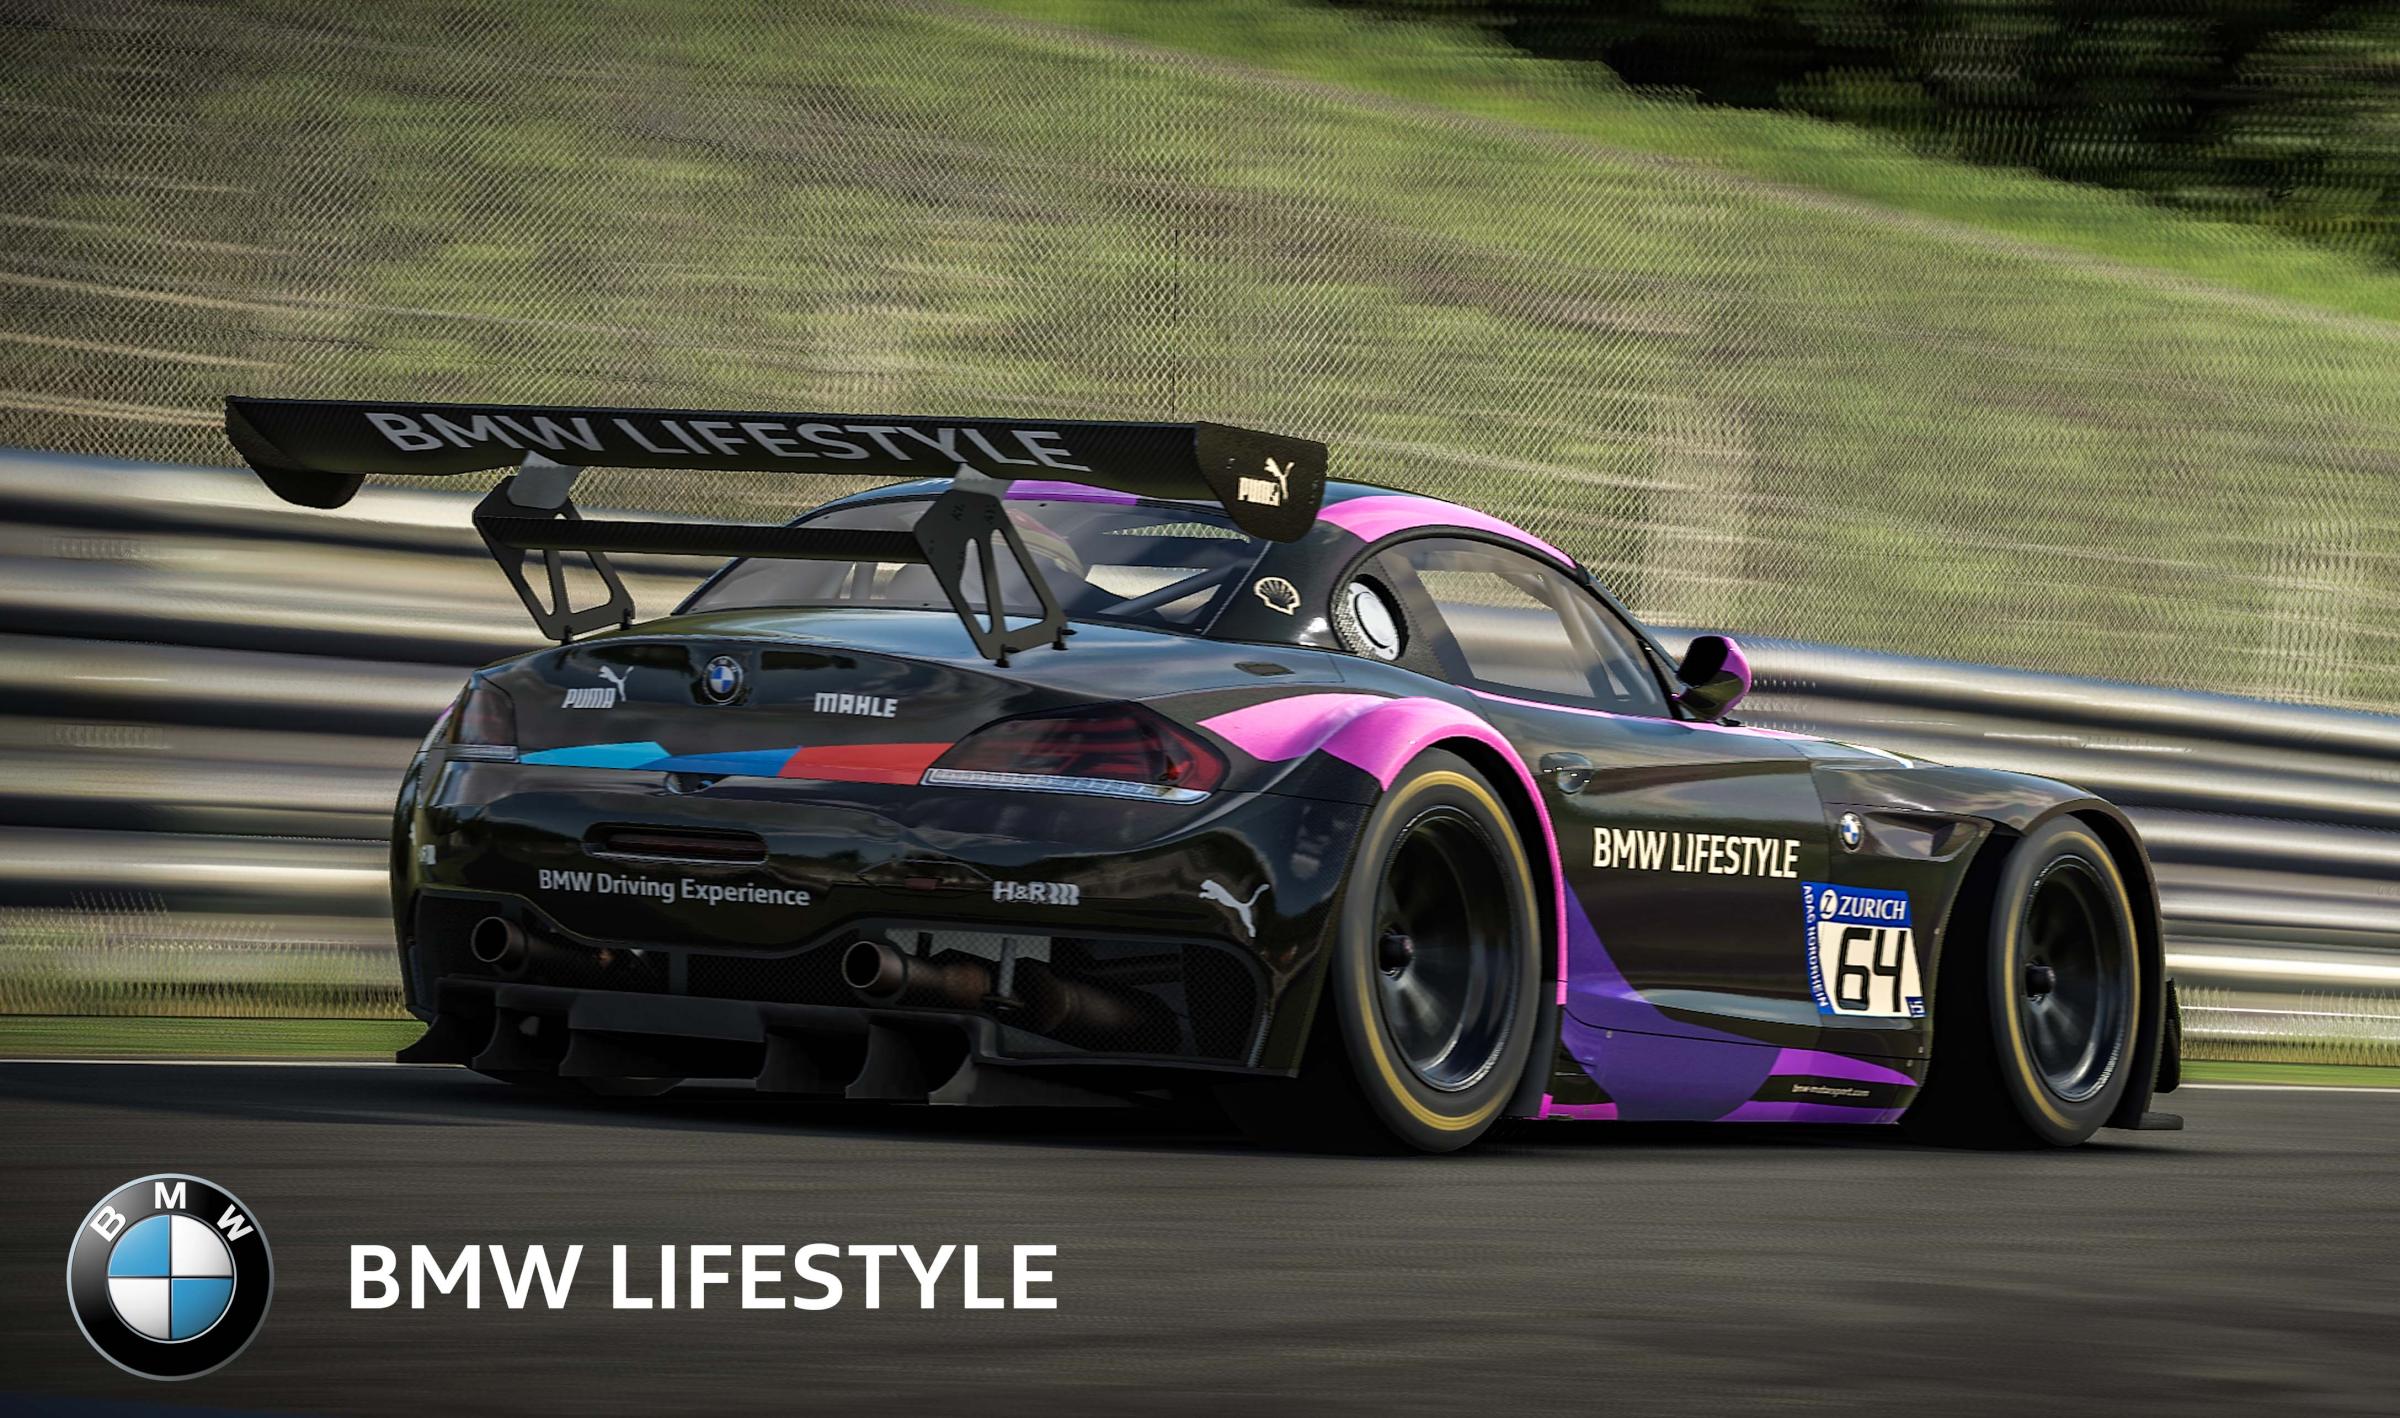 Preview of BMW Lifestyle DTM 2018 by Coen Klopman